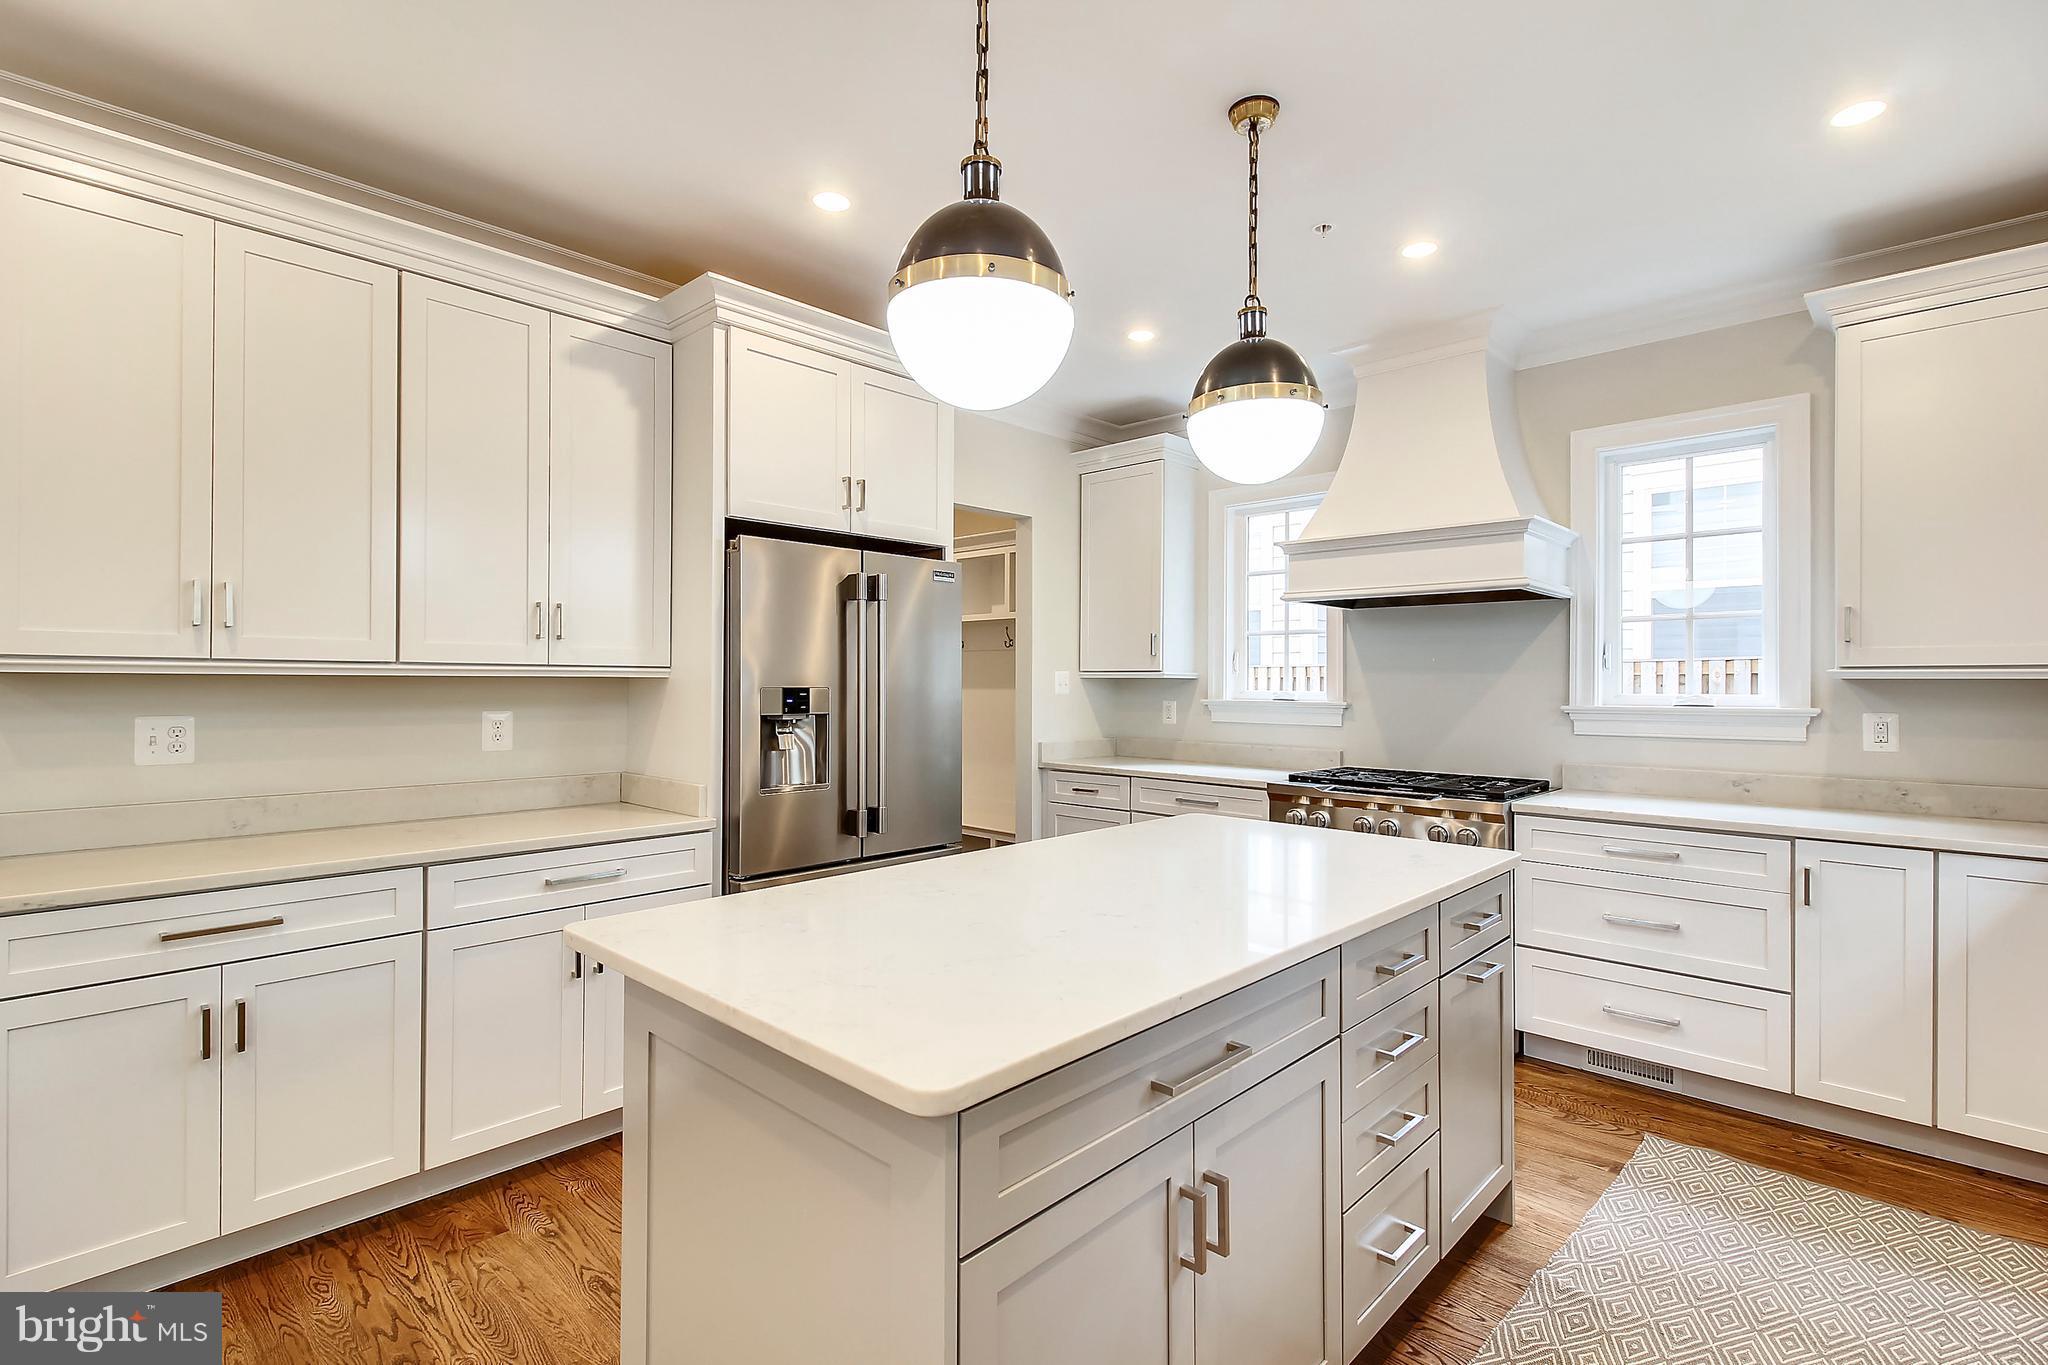 a kitchen with white cabinets and chandelier